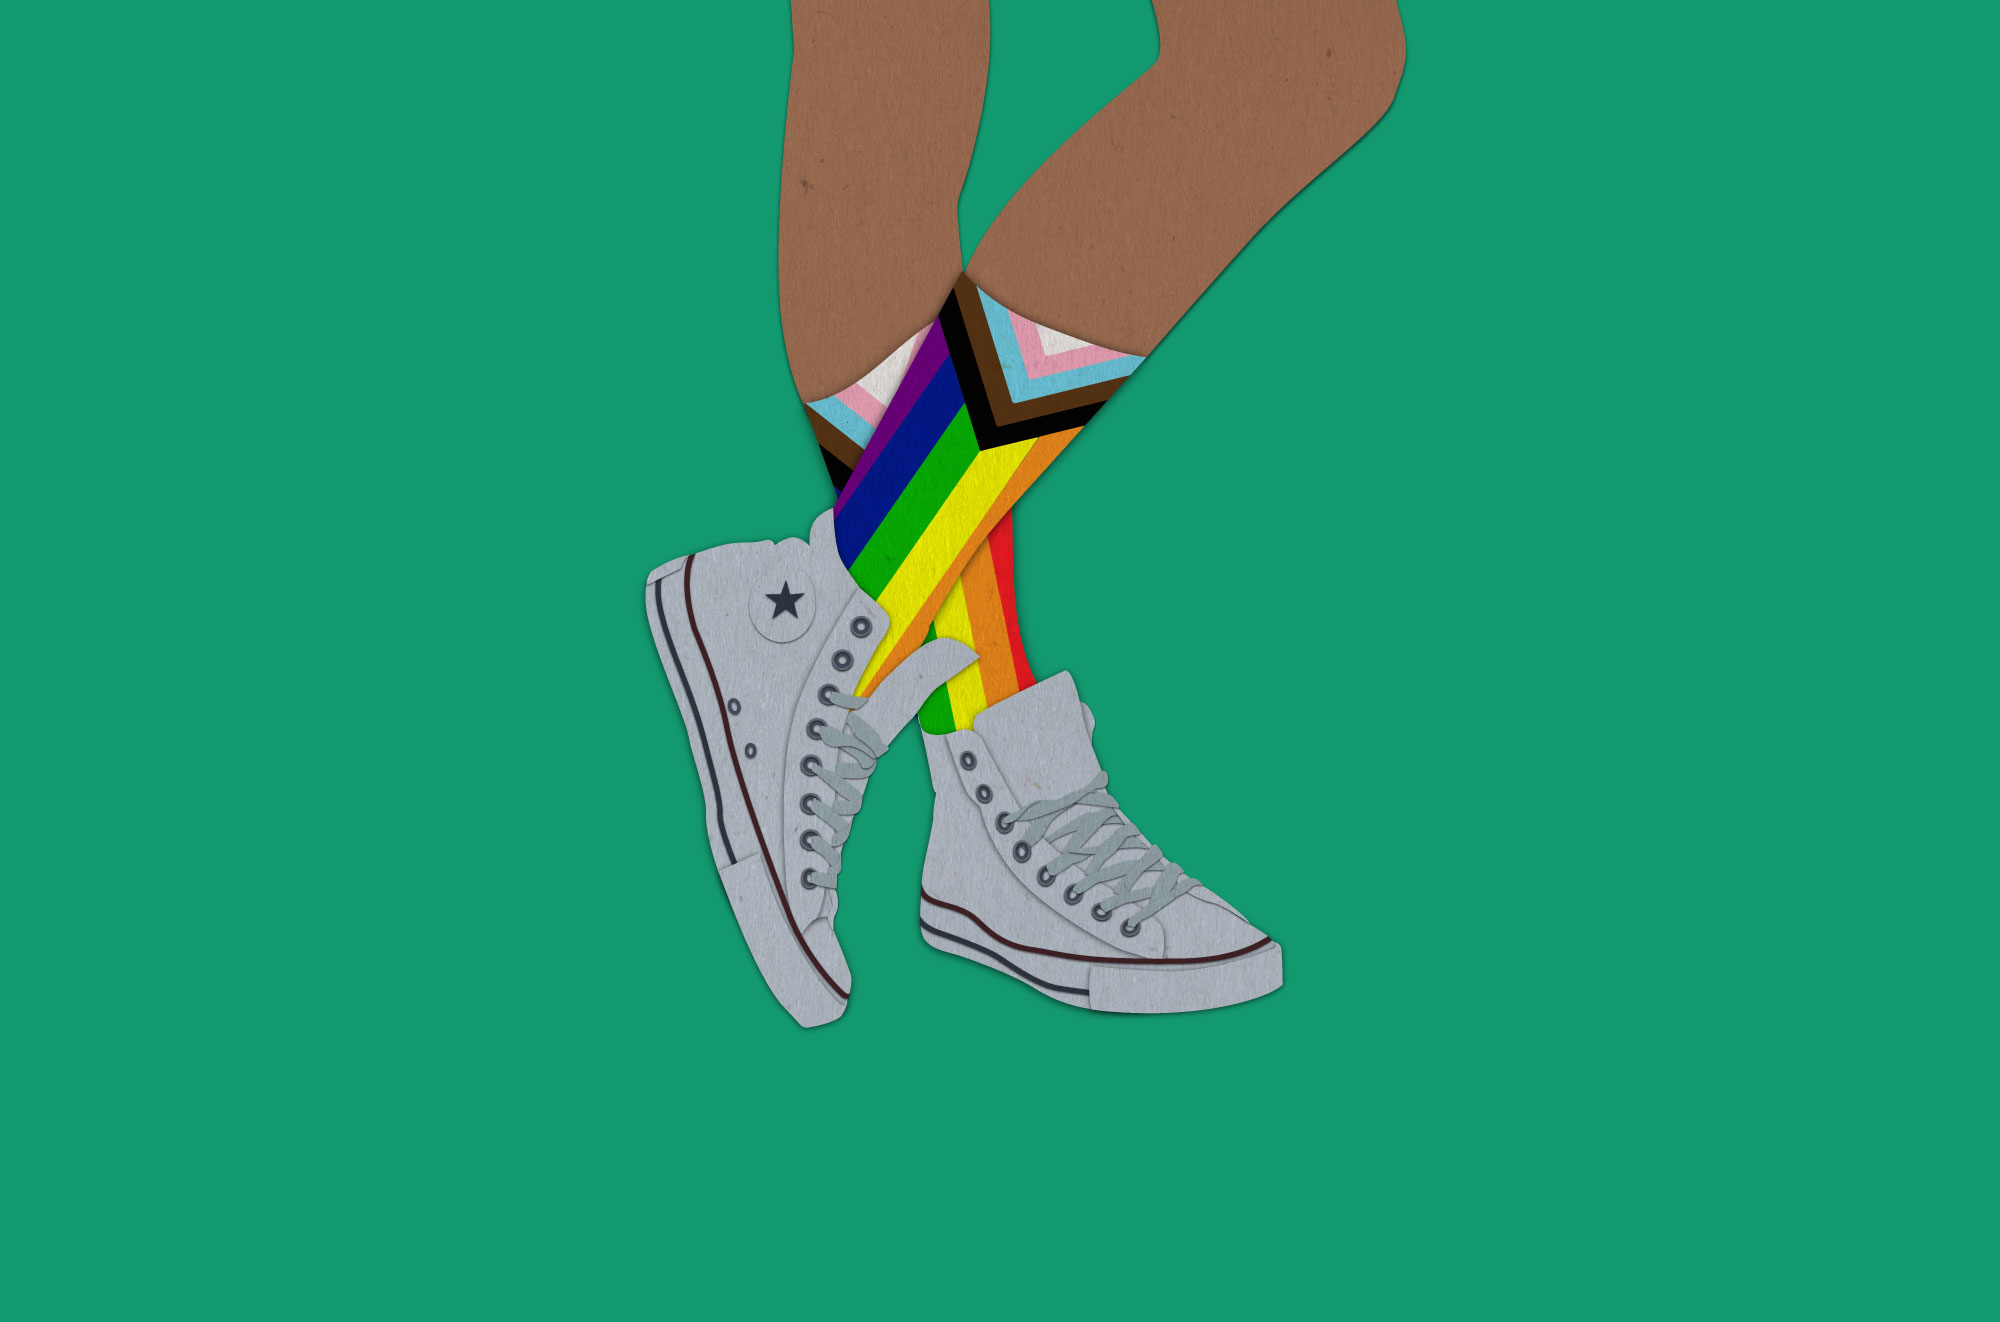 cut and arranged paper to resemble legs wearing white converse high-tops and Pride flag socks